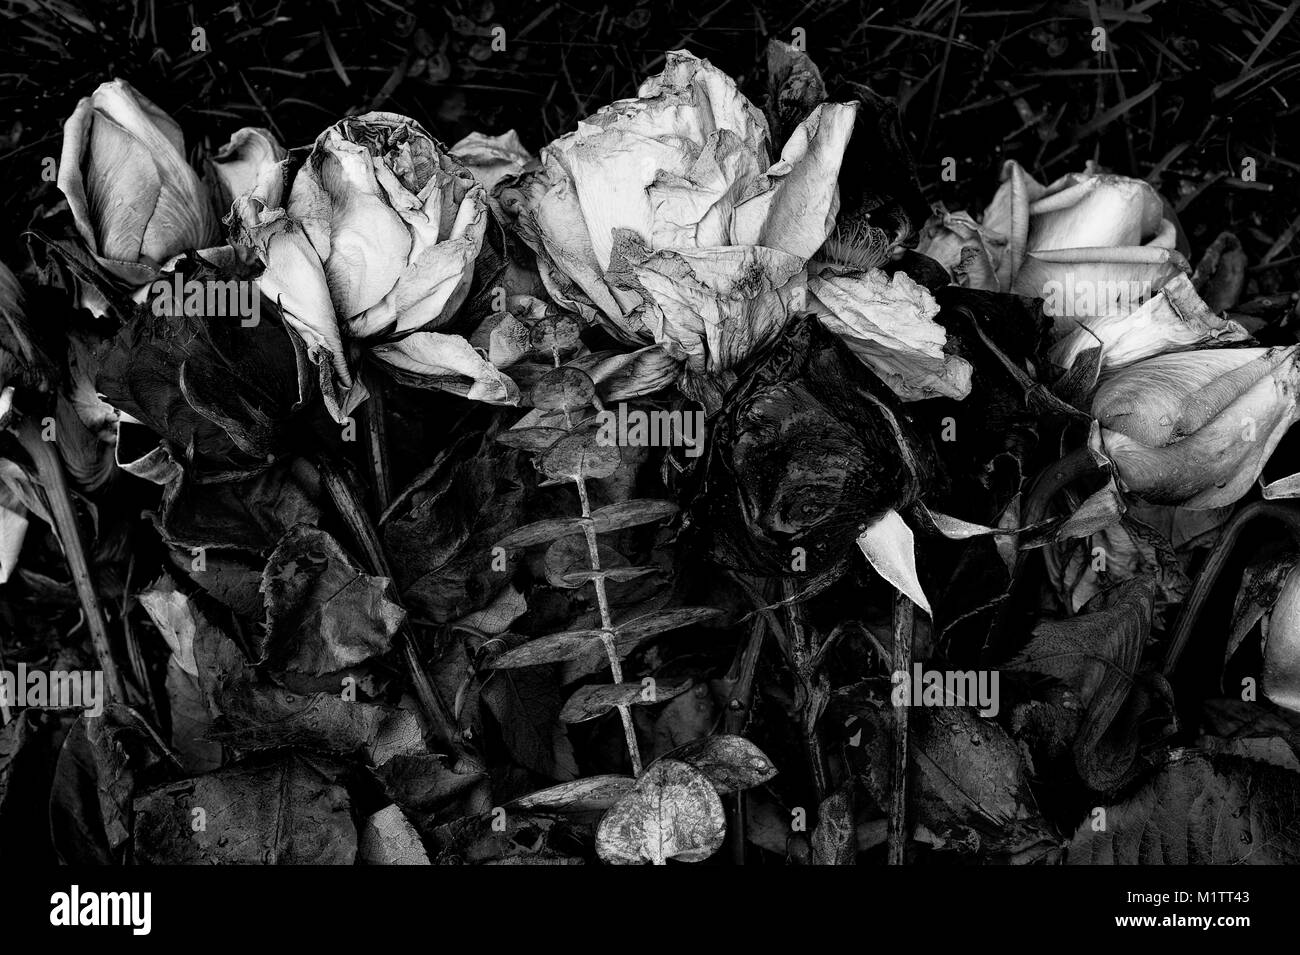 Laying a rose Black and White Stock Photos & Images - Alamy